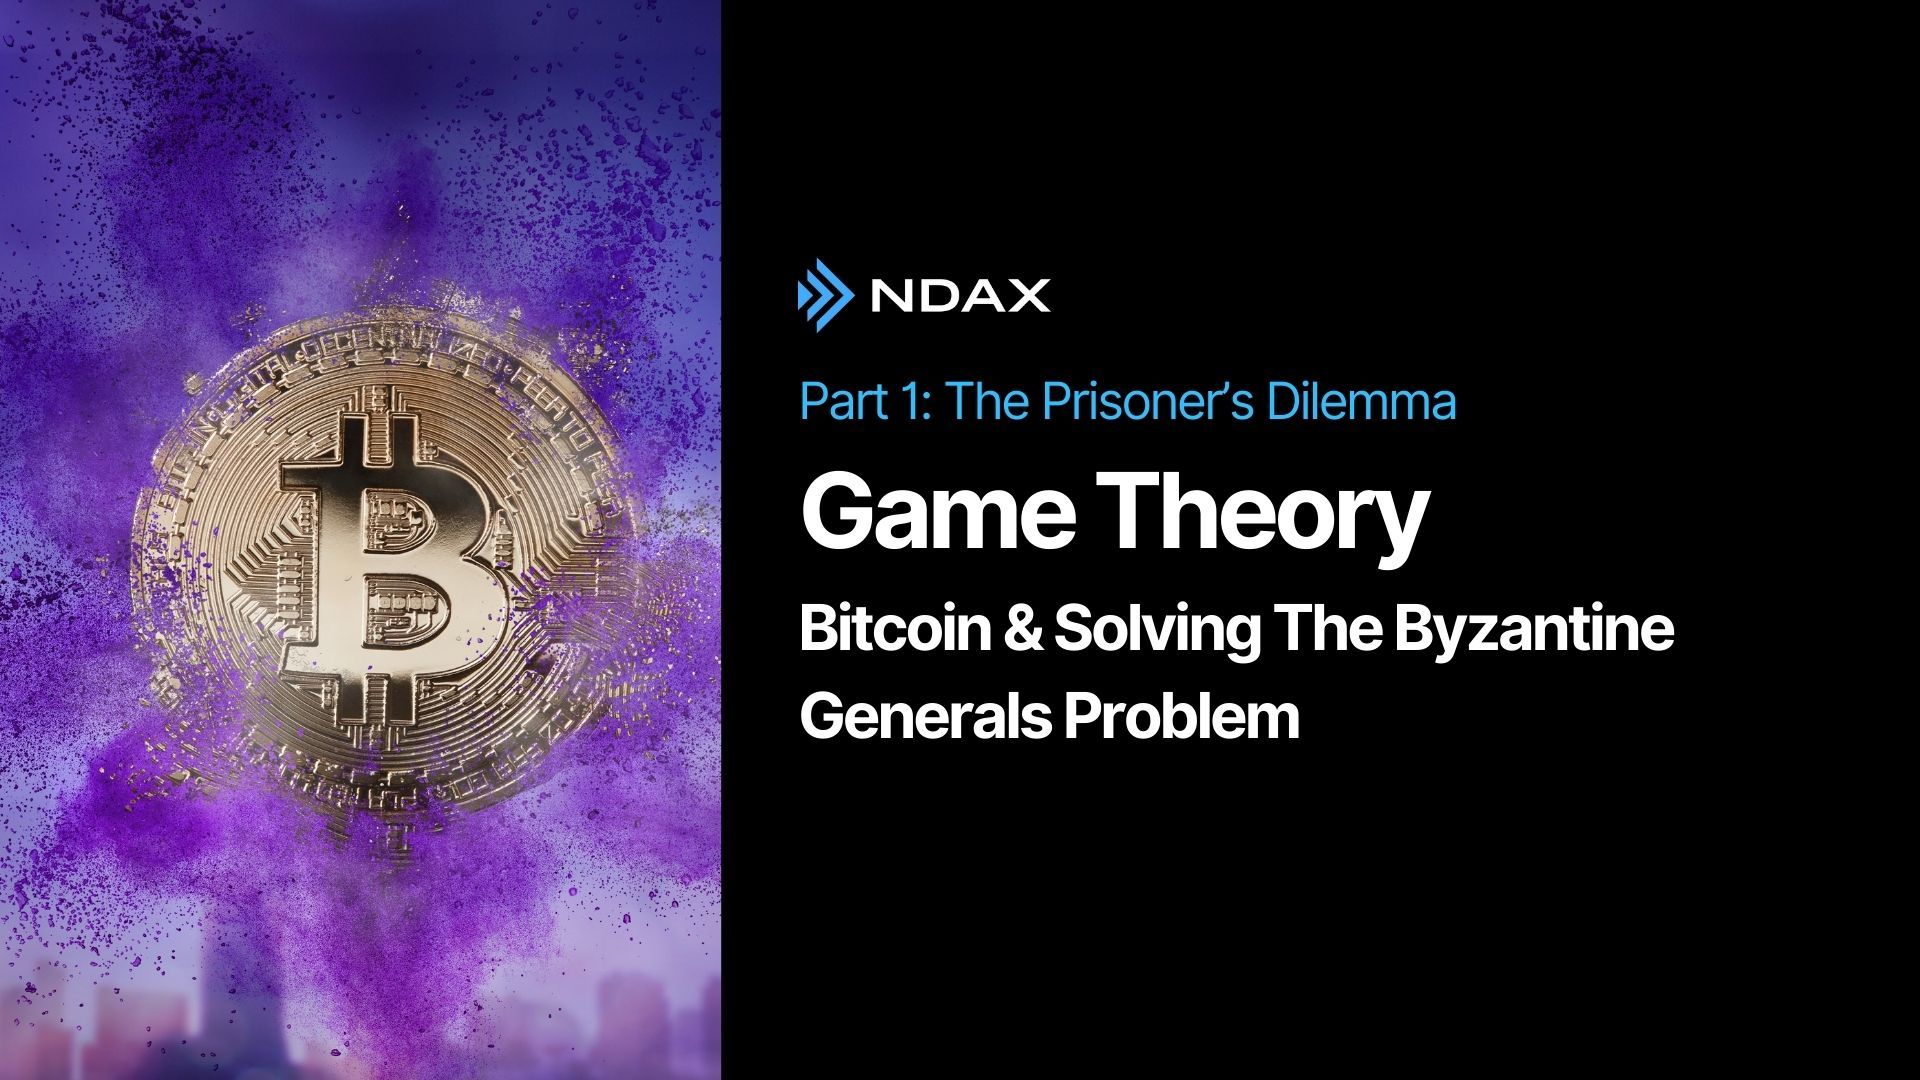 Part 1: Bitcoin, Game Theory and the Prisoner’s Dilemma